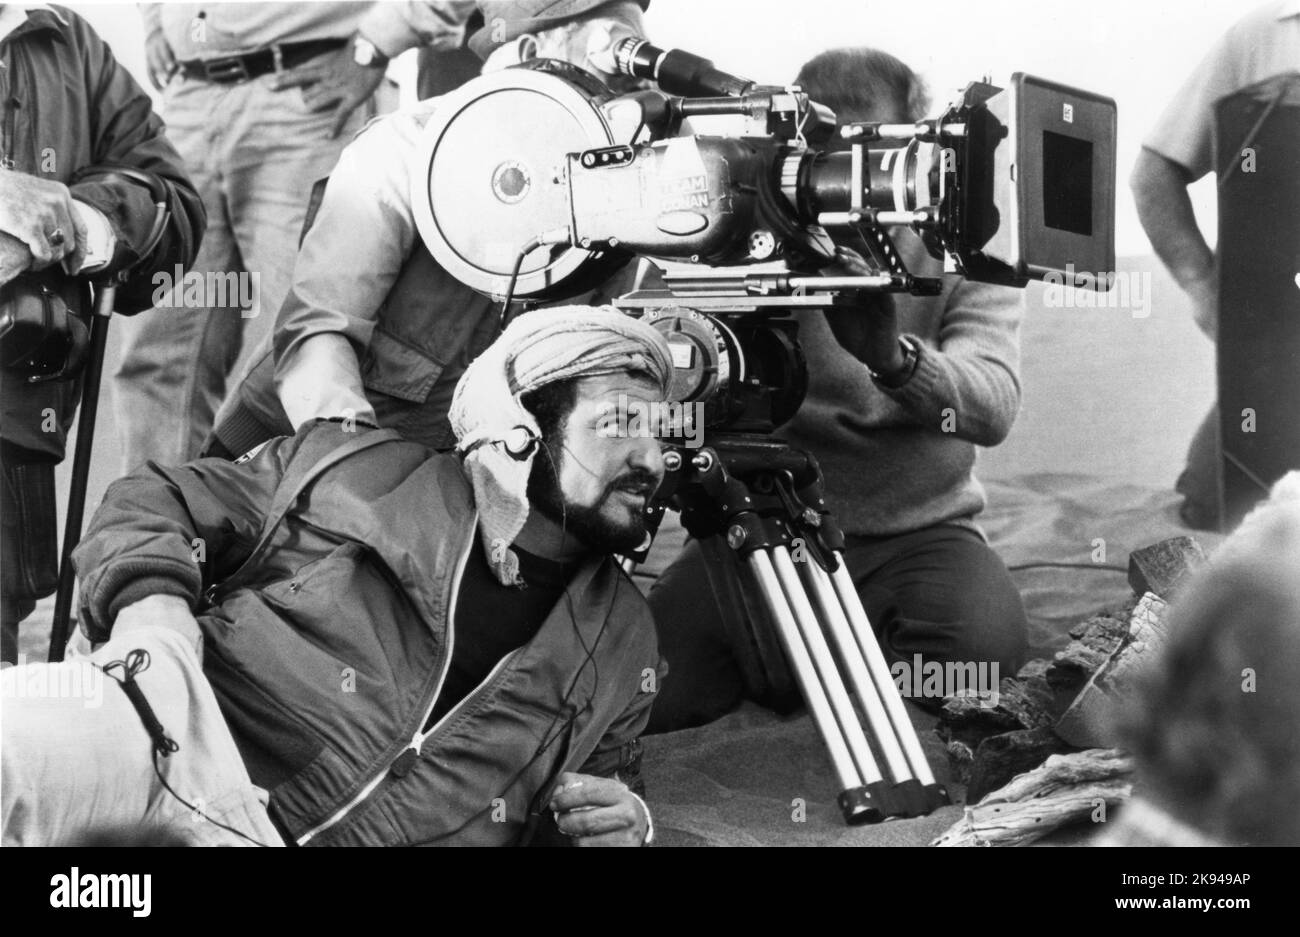 Director JOHN MILIUS on set location candid with Camera / Movie Crew during location filming in Spain for ARNOLD SCHWARZENEGGER in CONAN THE BARBARIAN 1982 director JOHN MILIUS based on the character created by Robert E. Howard written by John Milius and Oliver Stone music Basil Poledouris Dino De Laurentiis Company / Pressman Film / Estudios Churubusco Azteca S.A. / A-Team / Universal Pictures Stock Photo